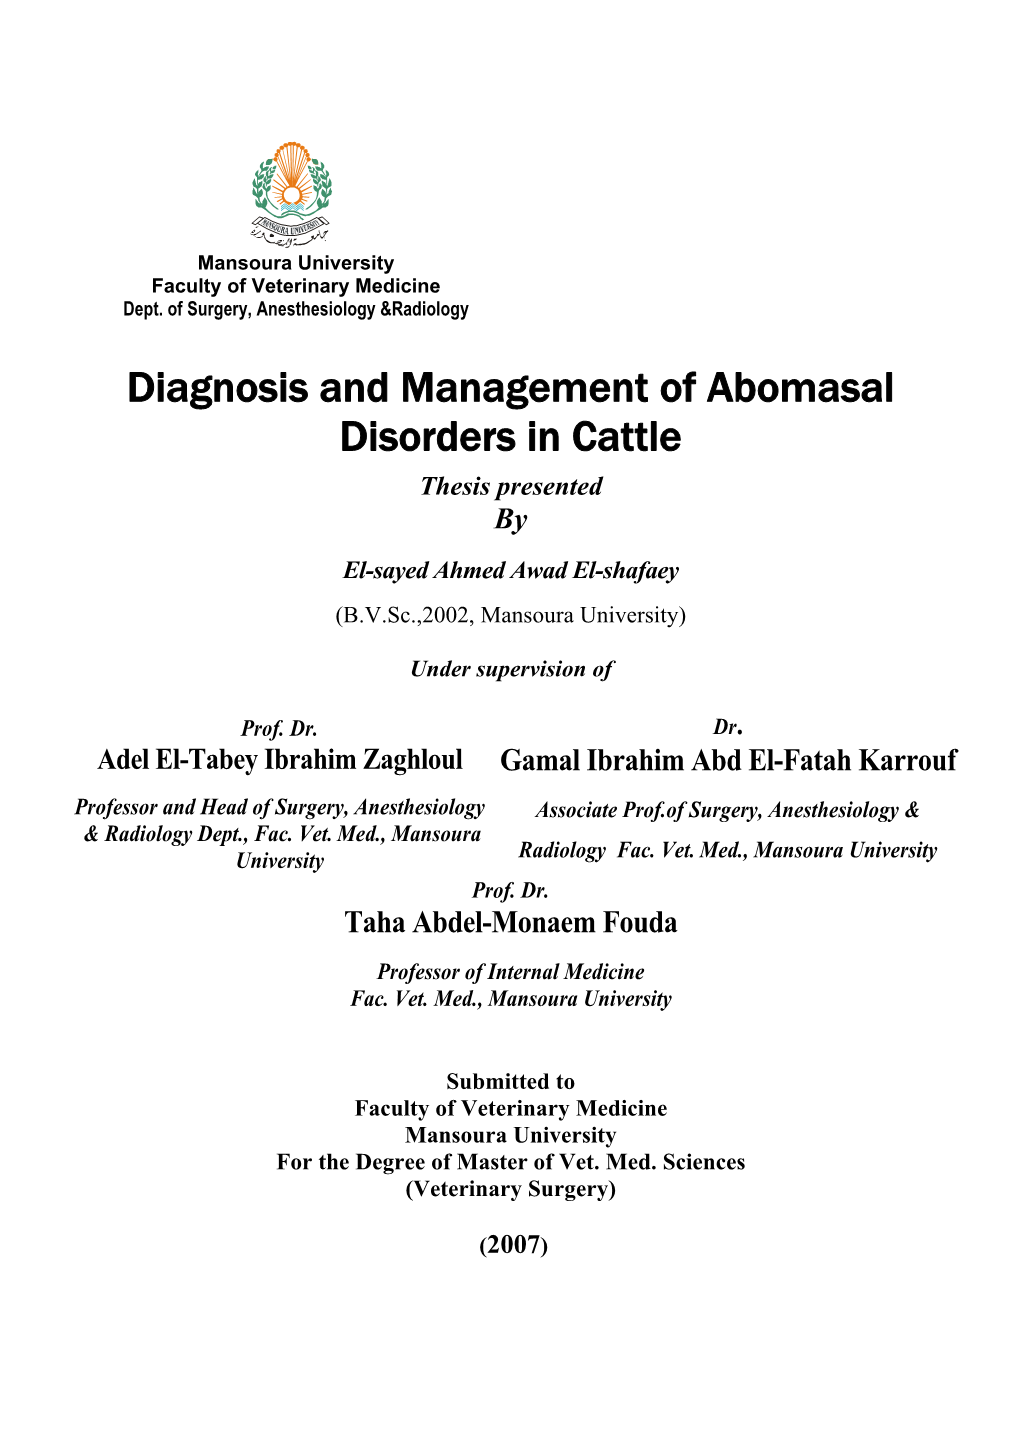 Diagnosis and Management of Abomasal Disorders in Cattle